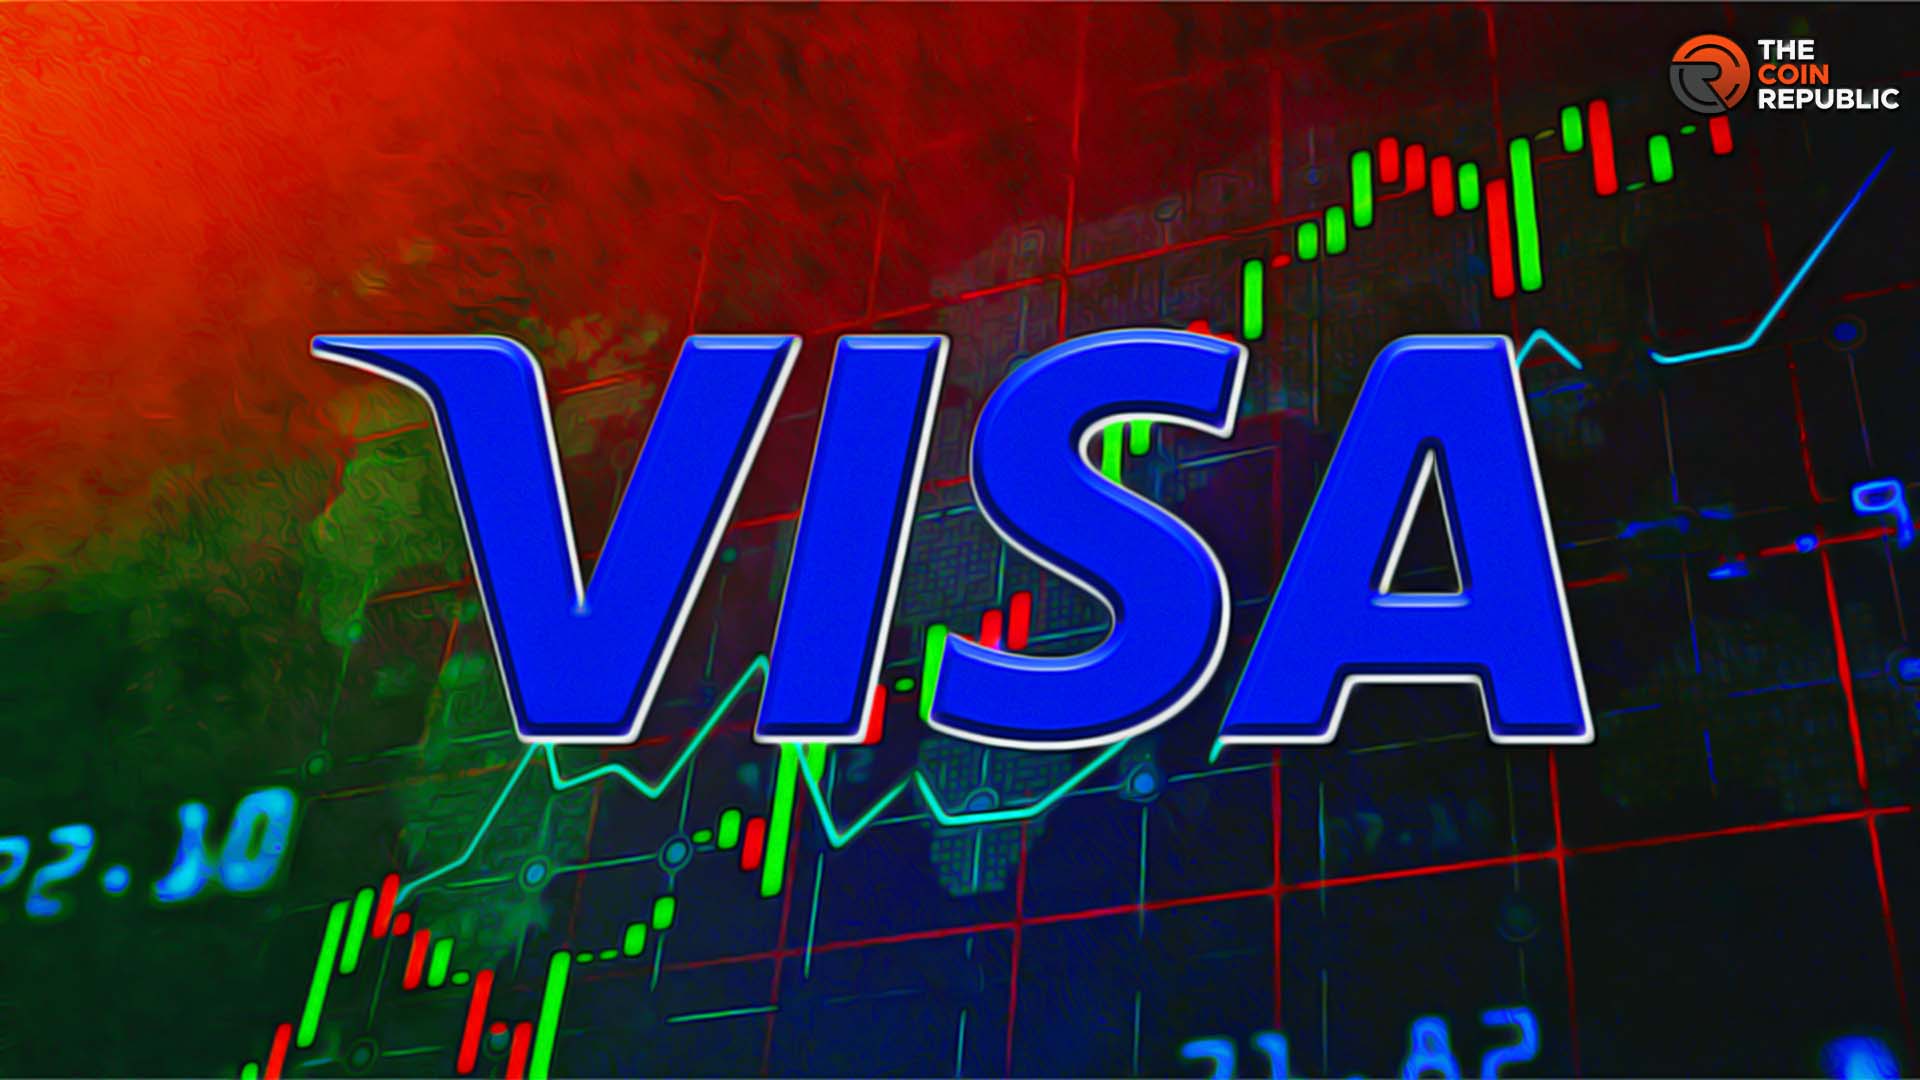 Visa Stock Price Acent Continues Ascent For Months, Until When?